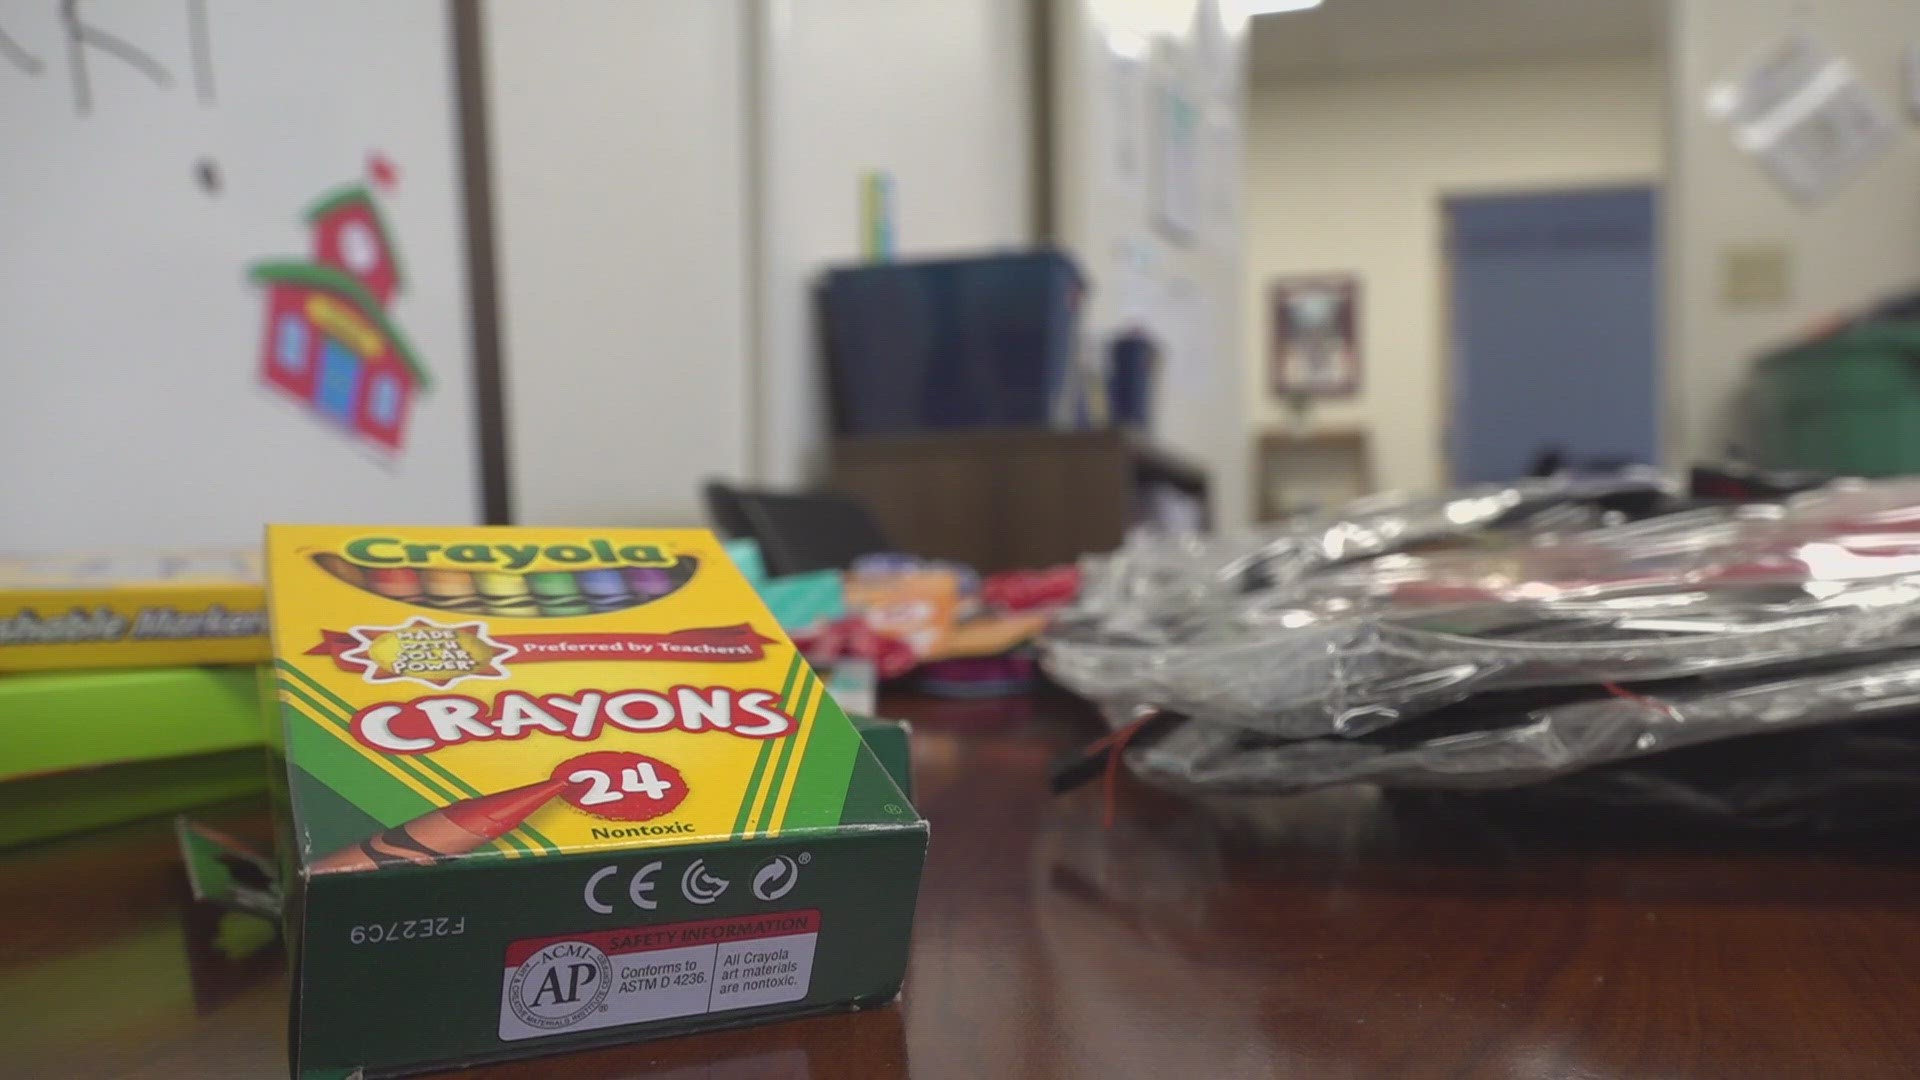 As a new school year begins, inflation has impacted everyone. The Family Support Center at Midland ISD helps those in need and they have seen the impacts firsthand.